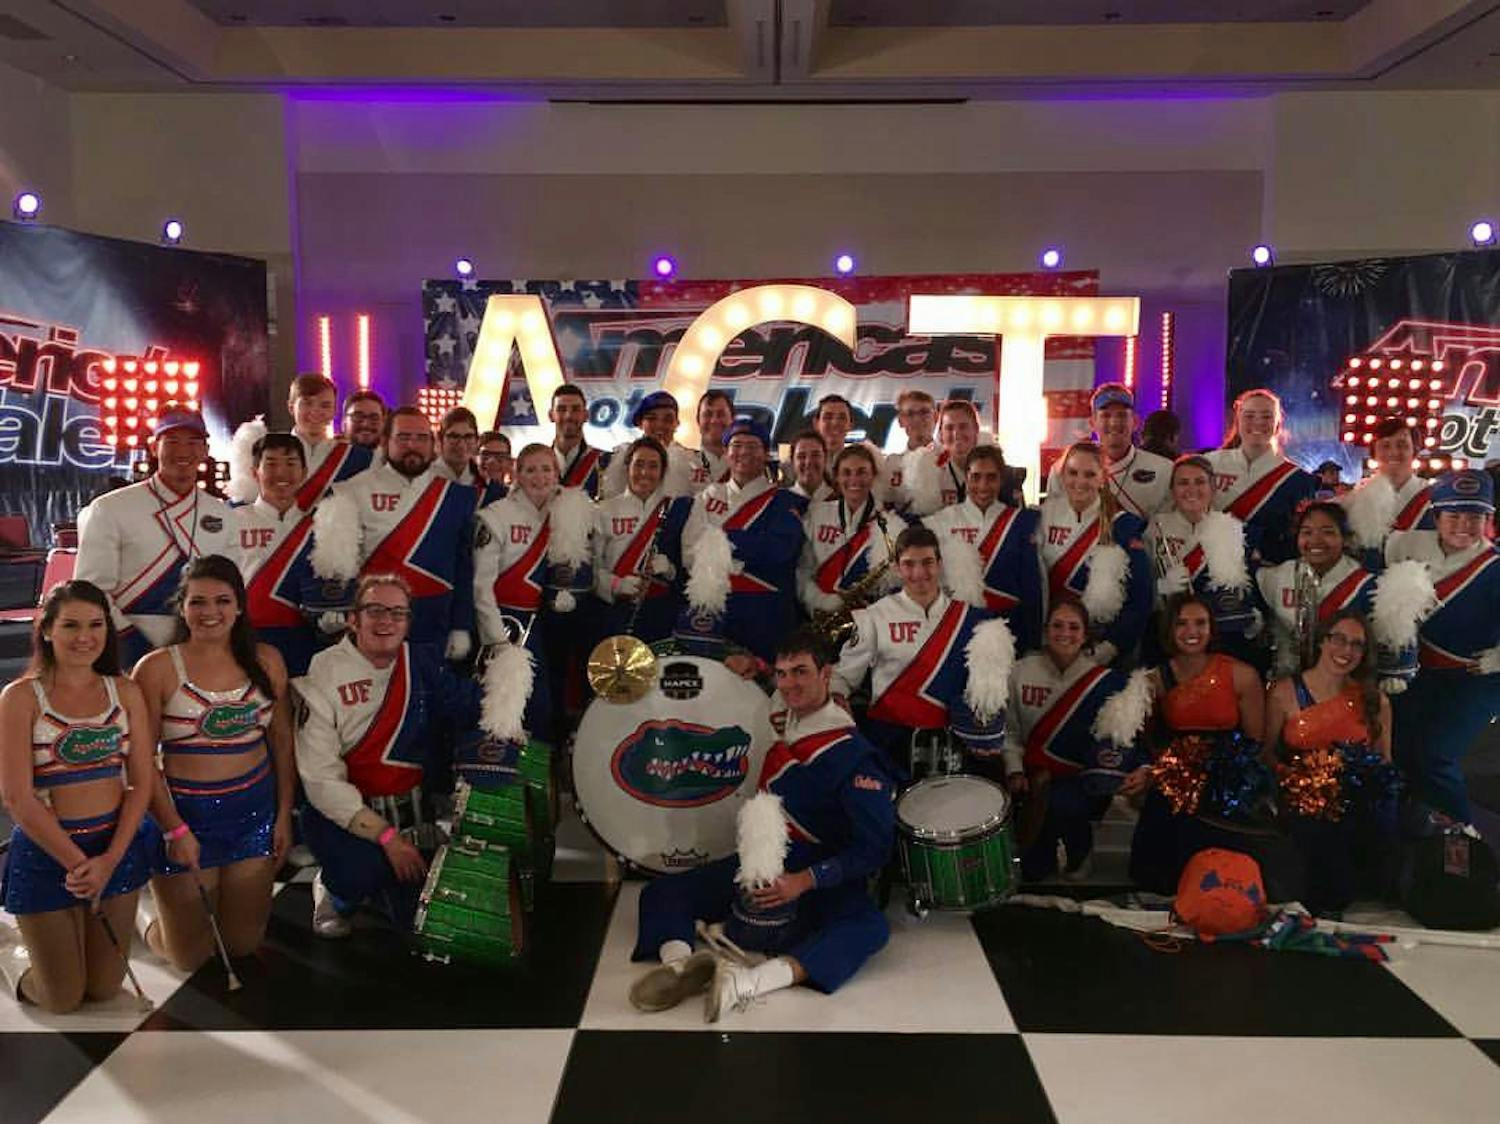 About 50 members of UF's Pride of the Sunshine marching band participate at a live-audition of America's Got Talent in Jacksonville in January. The whole marching band was filmed in Gainesville in January at Ben Hill Griffin Stadium to be featured on the show during promotional advertising.&nbsp;
&nbsp;